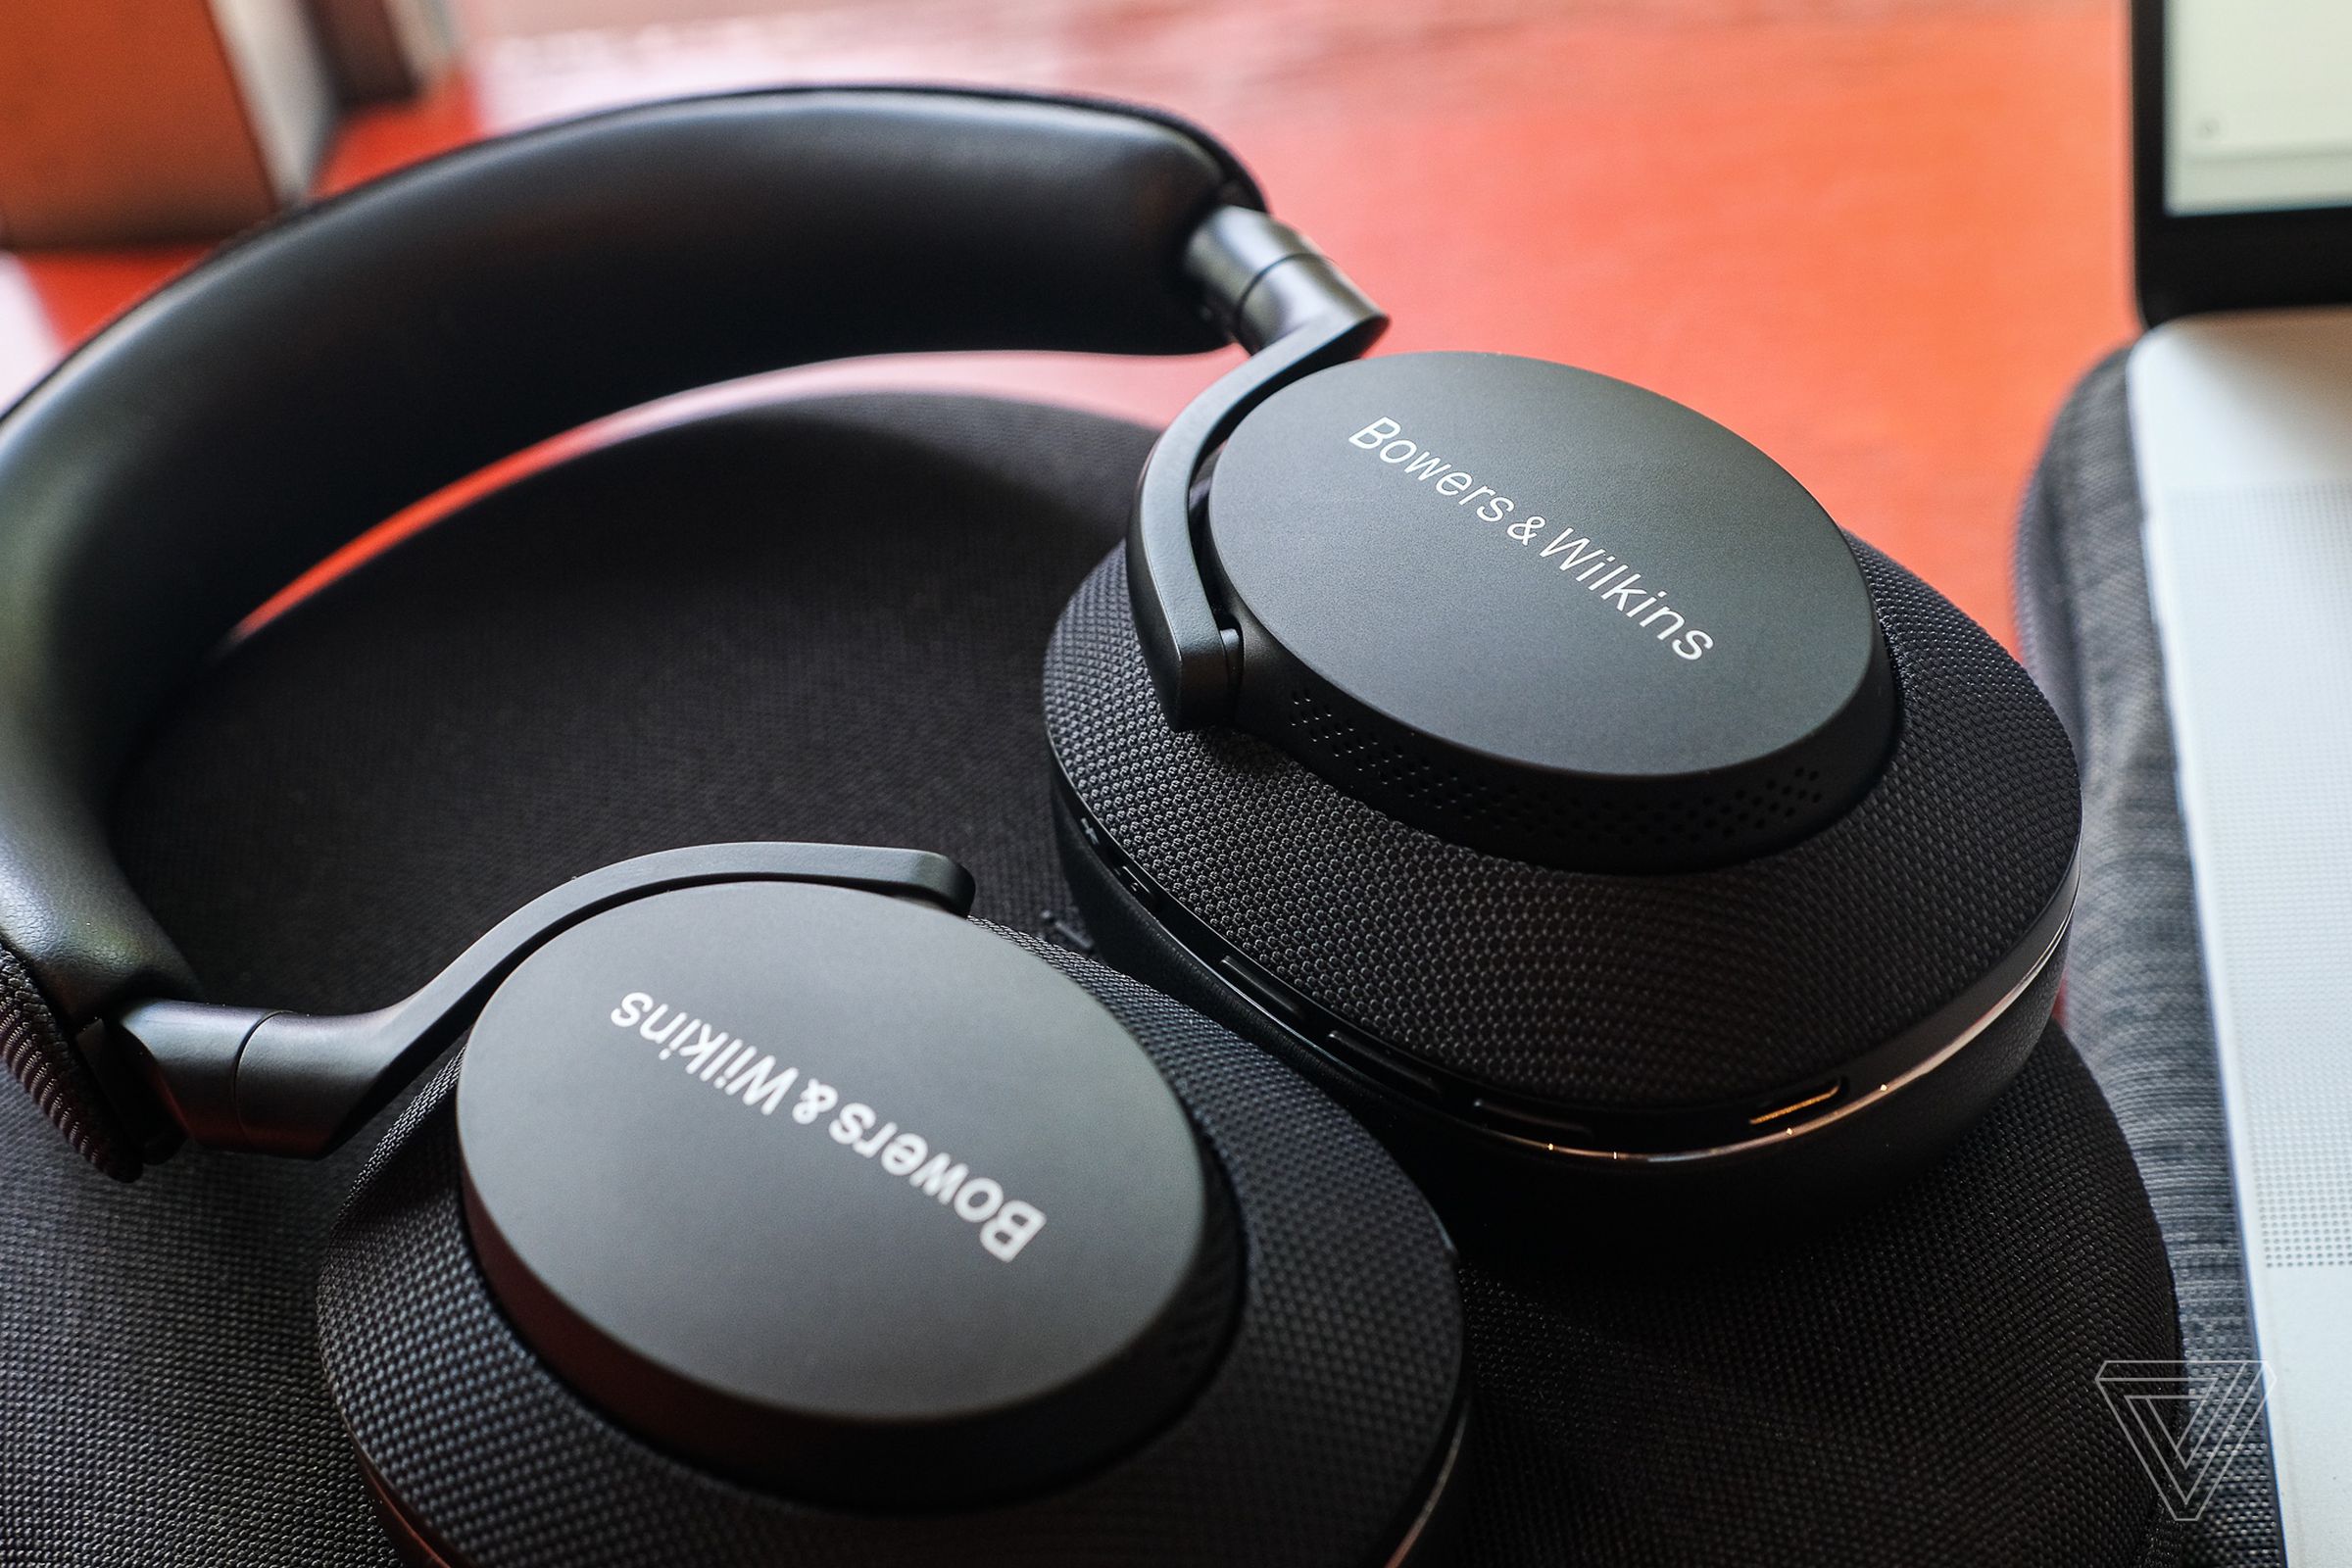 The PX7 S2 headphones look similar to their B&W predecessors.